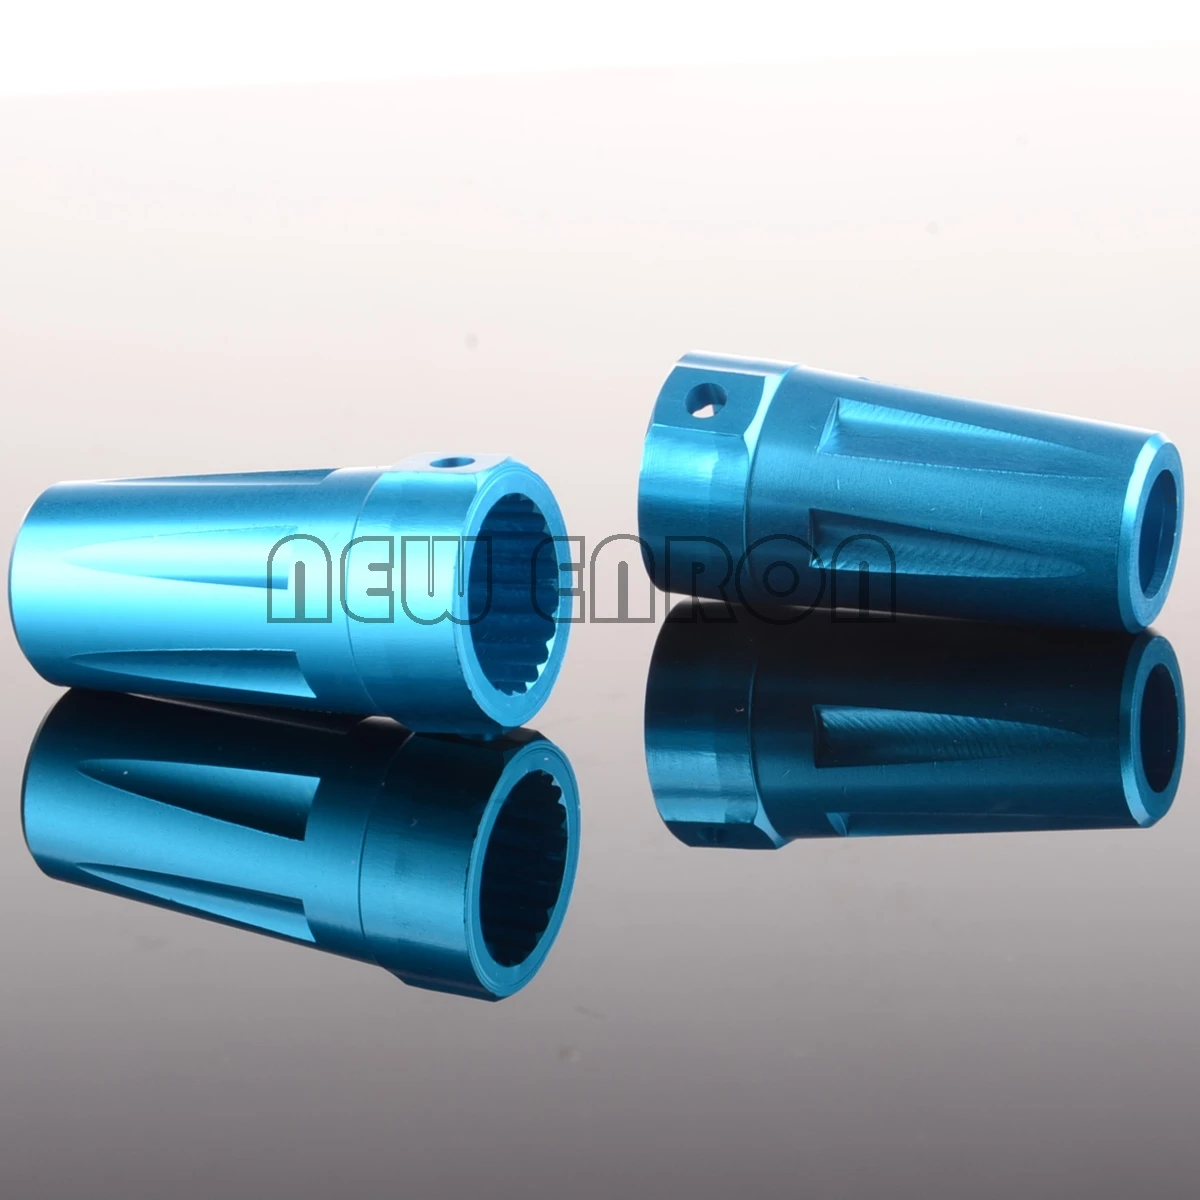 https://ae01.alicdn.com/kf/H941ce809e8a148ff8537257d0641fe74j/2Pc-1-10-Metal-Rear-Knuckle-Axle-Adapter-Left-or-Right-AX80071-For-RC-Crawler-Car.jpg